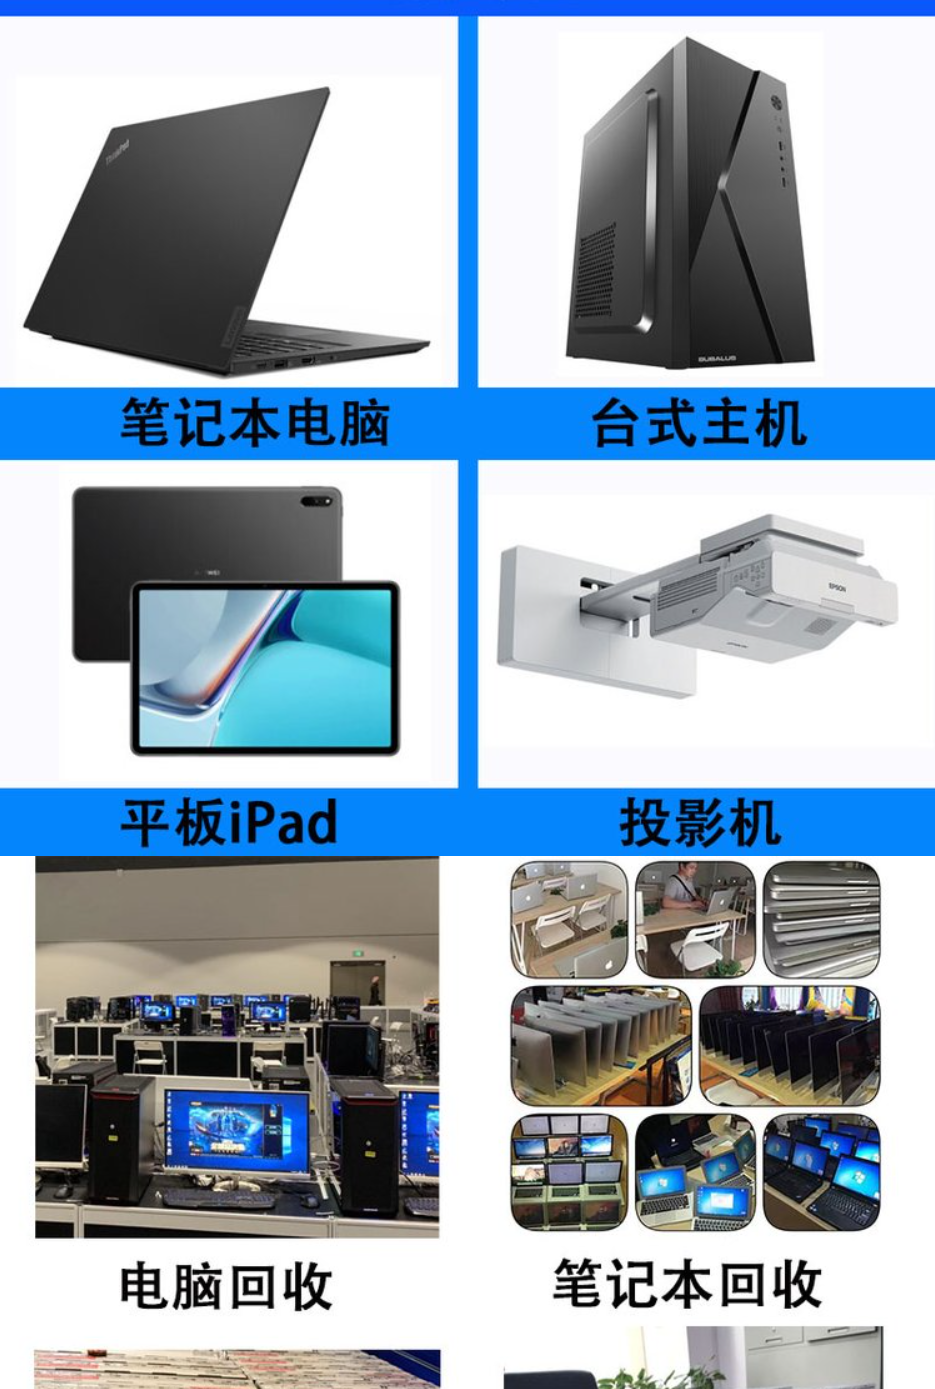 Starting from one day for renting second-hand mobile phones, Apple iPad computers can be rented for short periods without a deposit, and for long periods, the deposit can be as low as 0